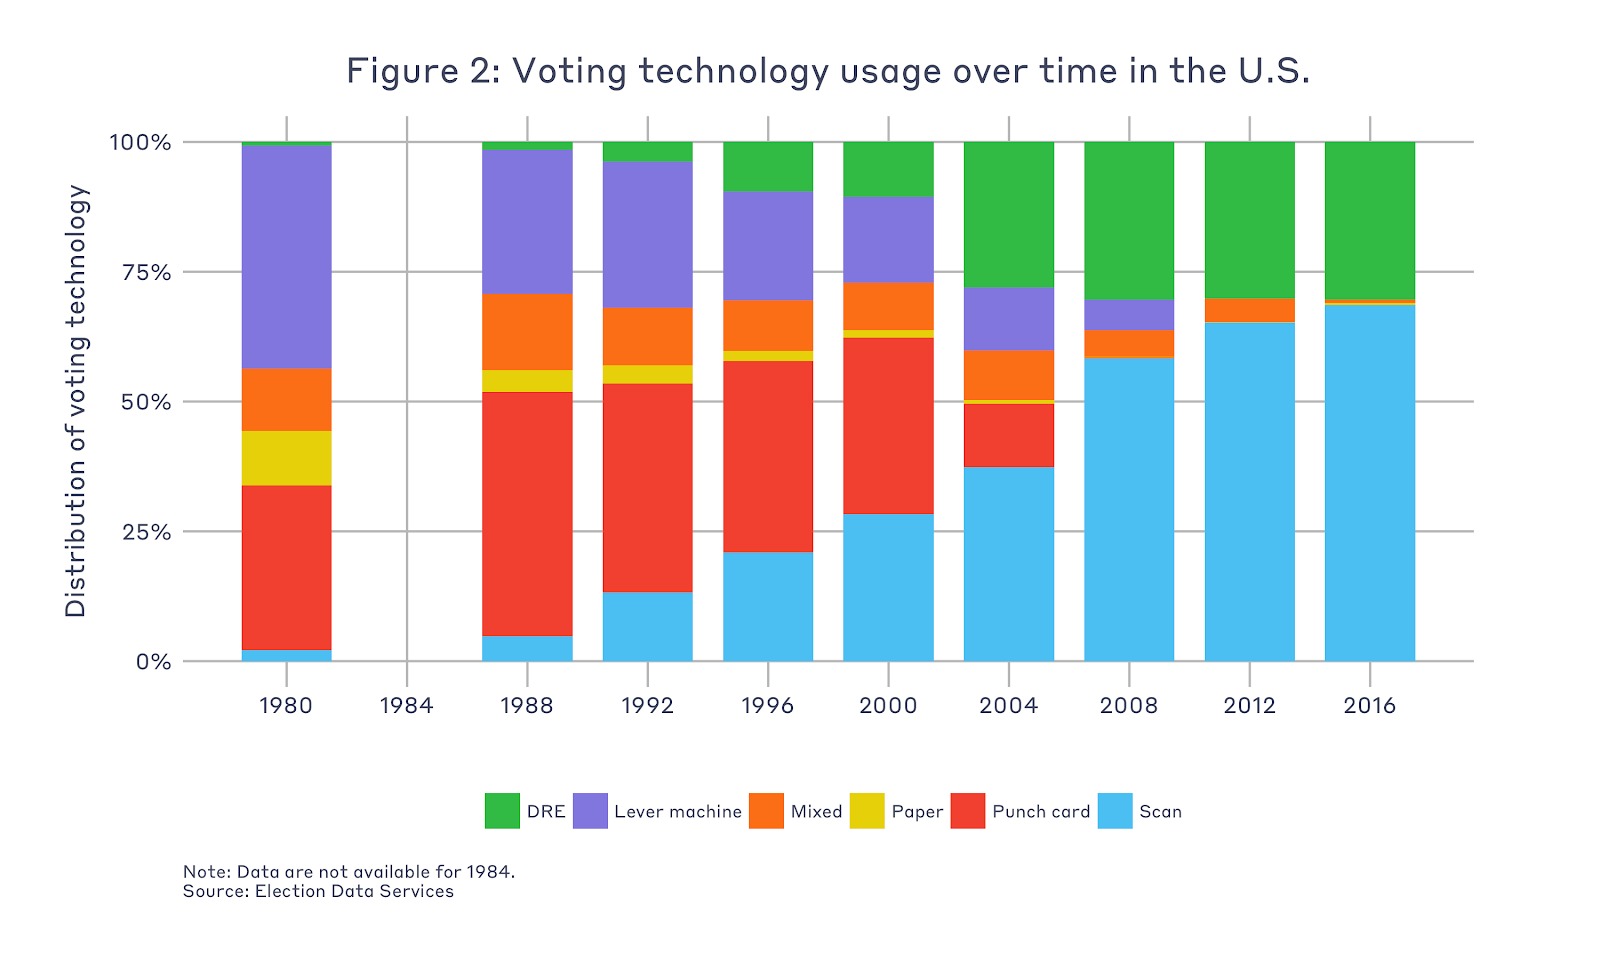 Voting Technology Usage Graphed Over Time Since 1980